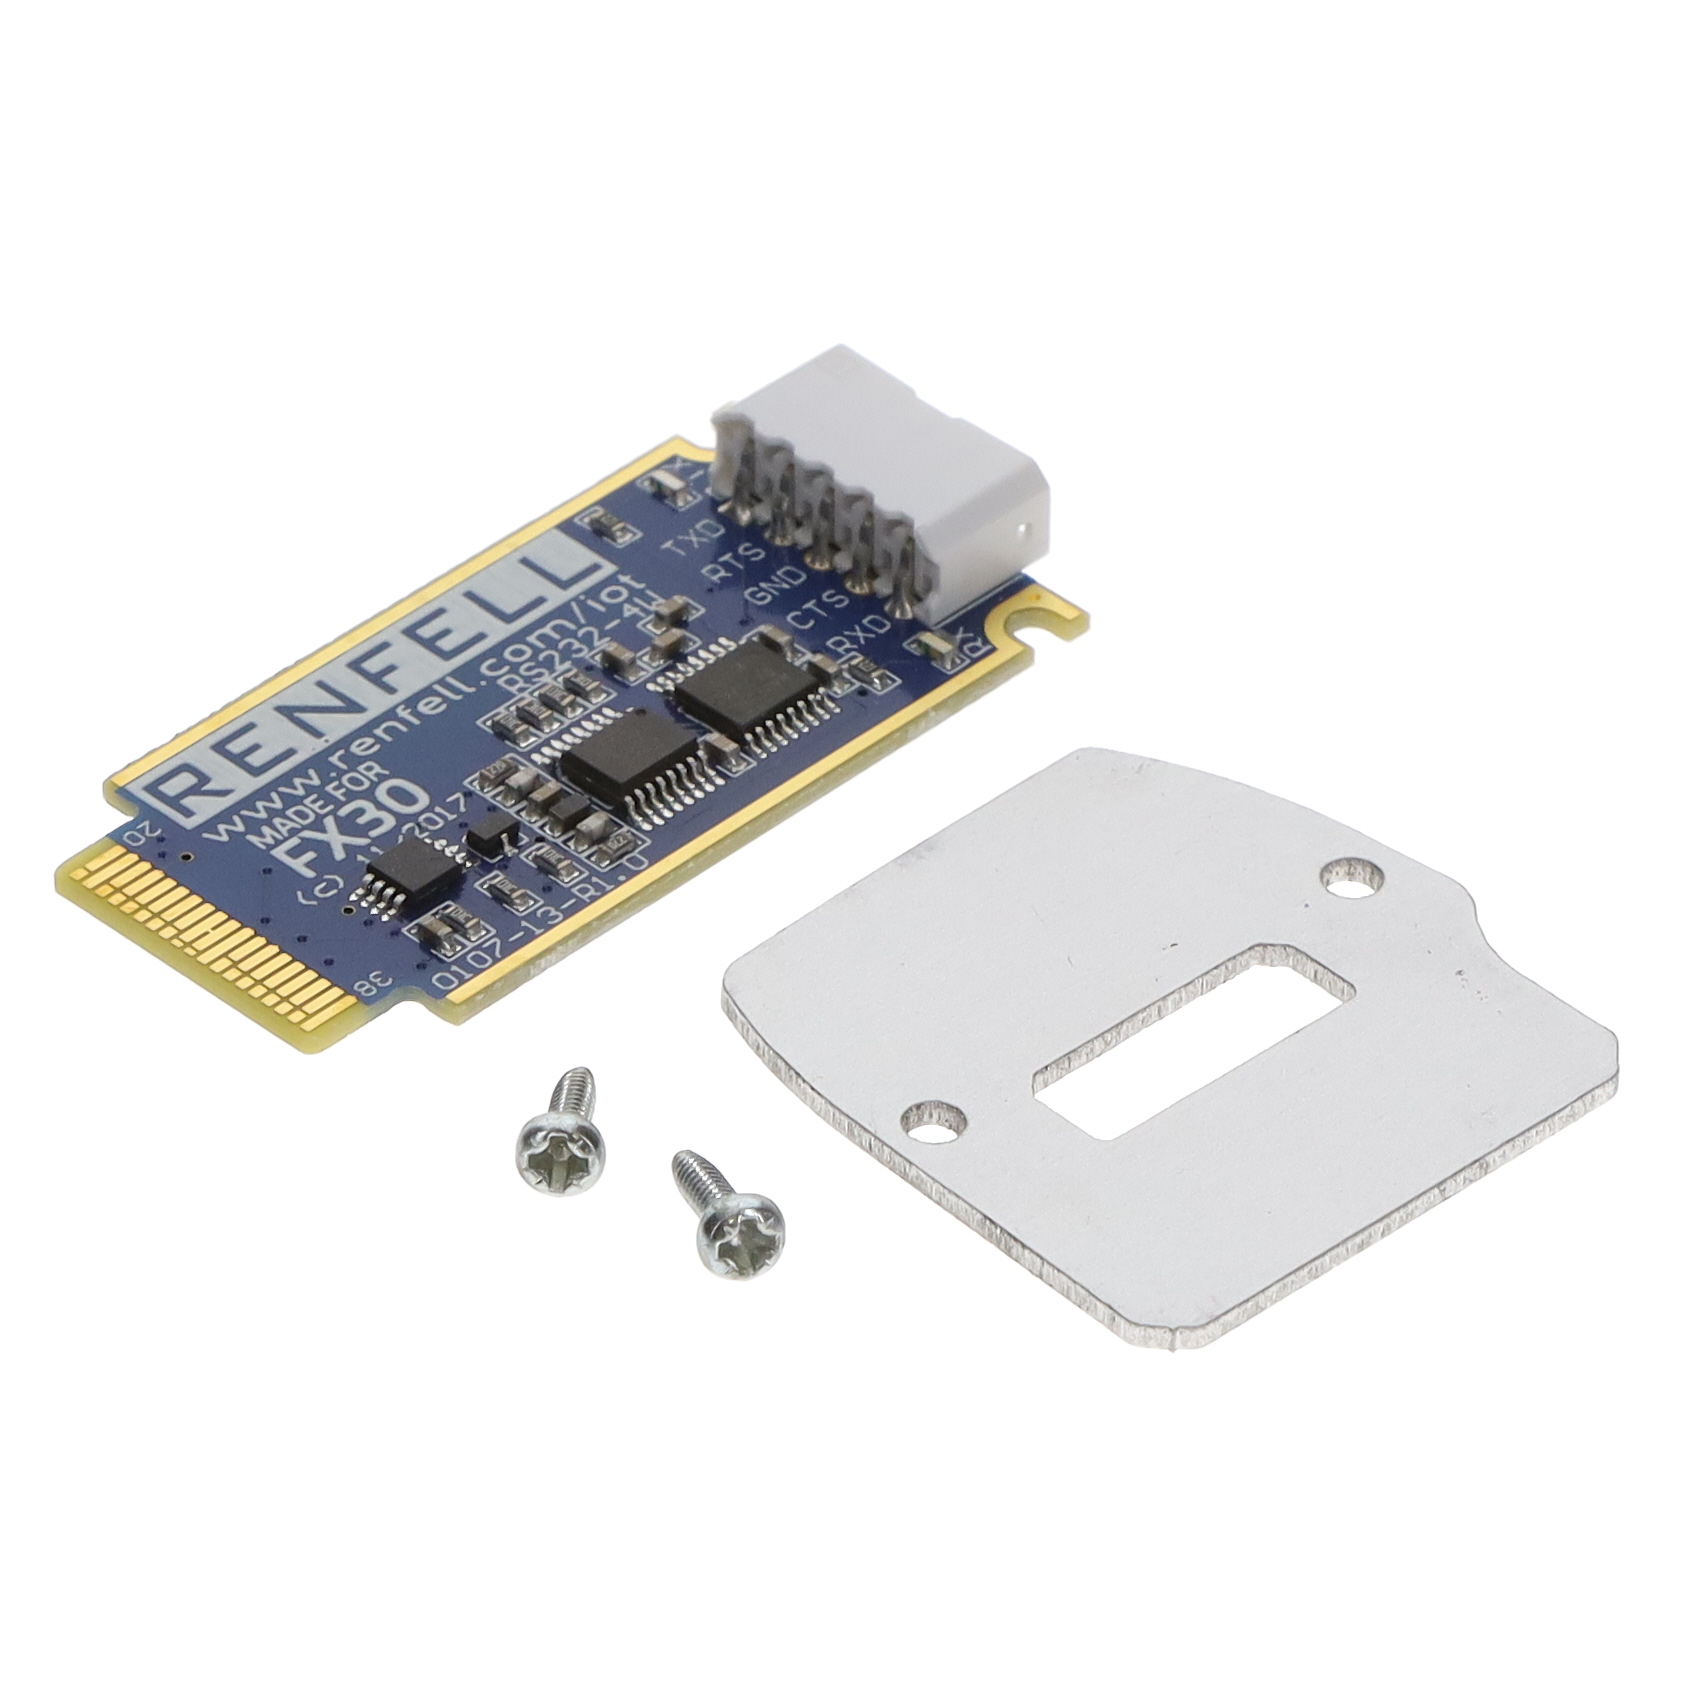 【0107--13-R1】RS232 4-WIRE IOT CARD (FX30)